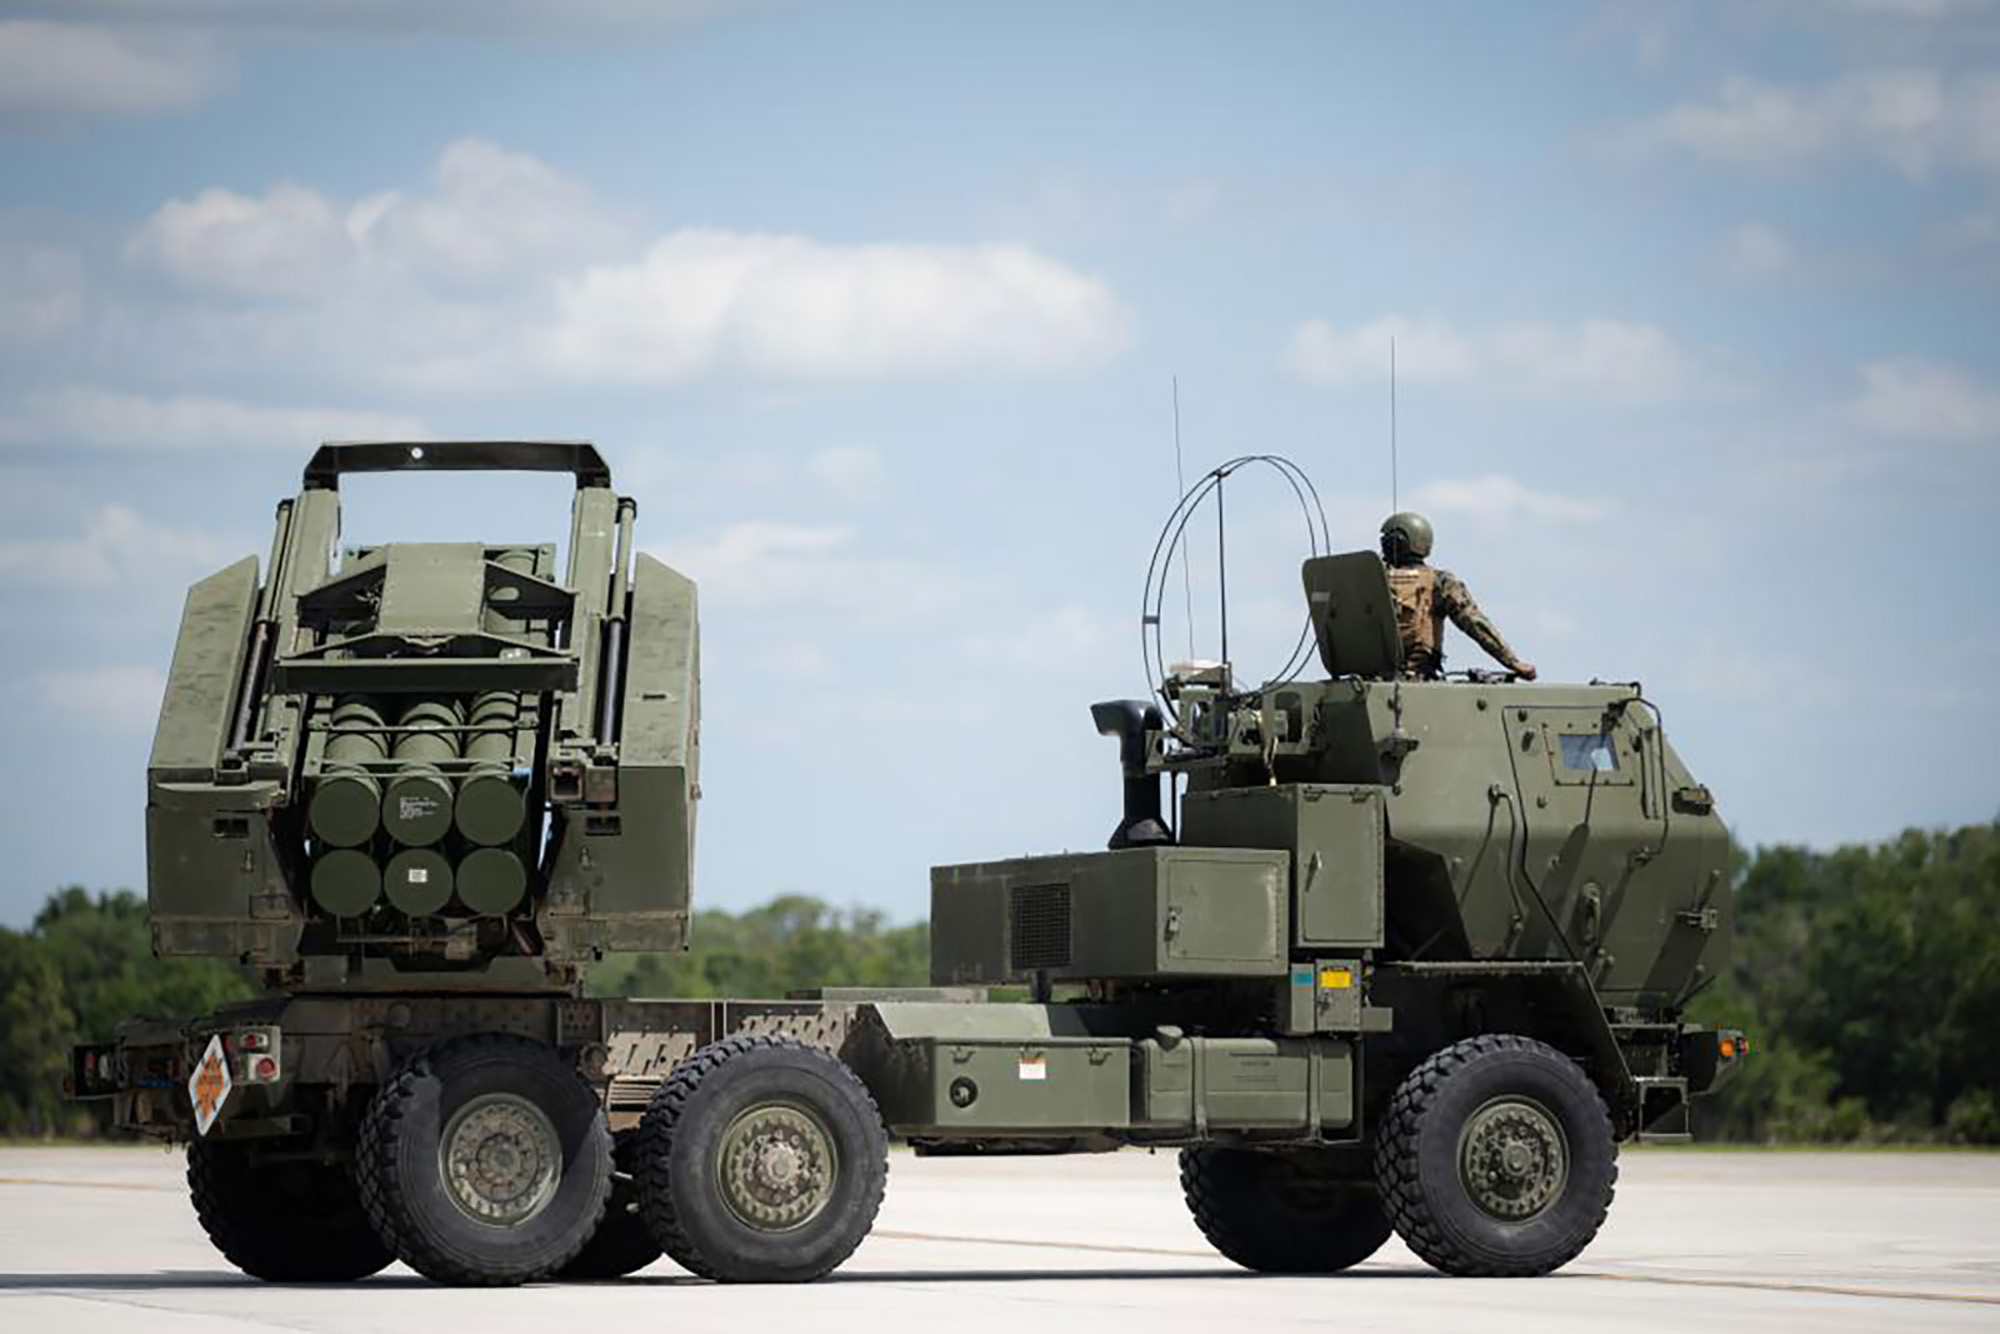 A High Mobility Artillery Rocket System during a live-fire training mission in Florida on May 10. (...